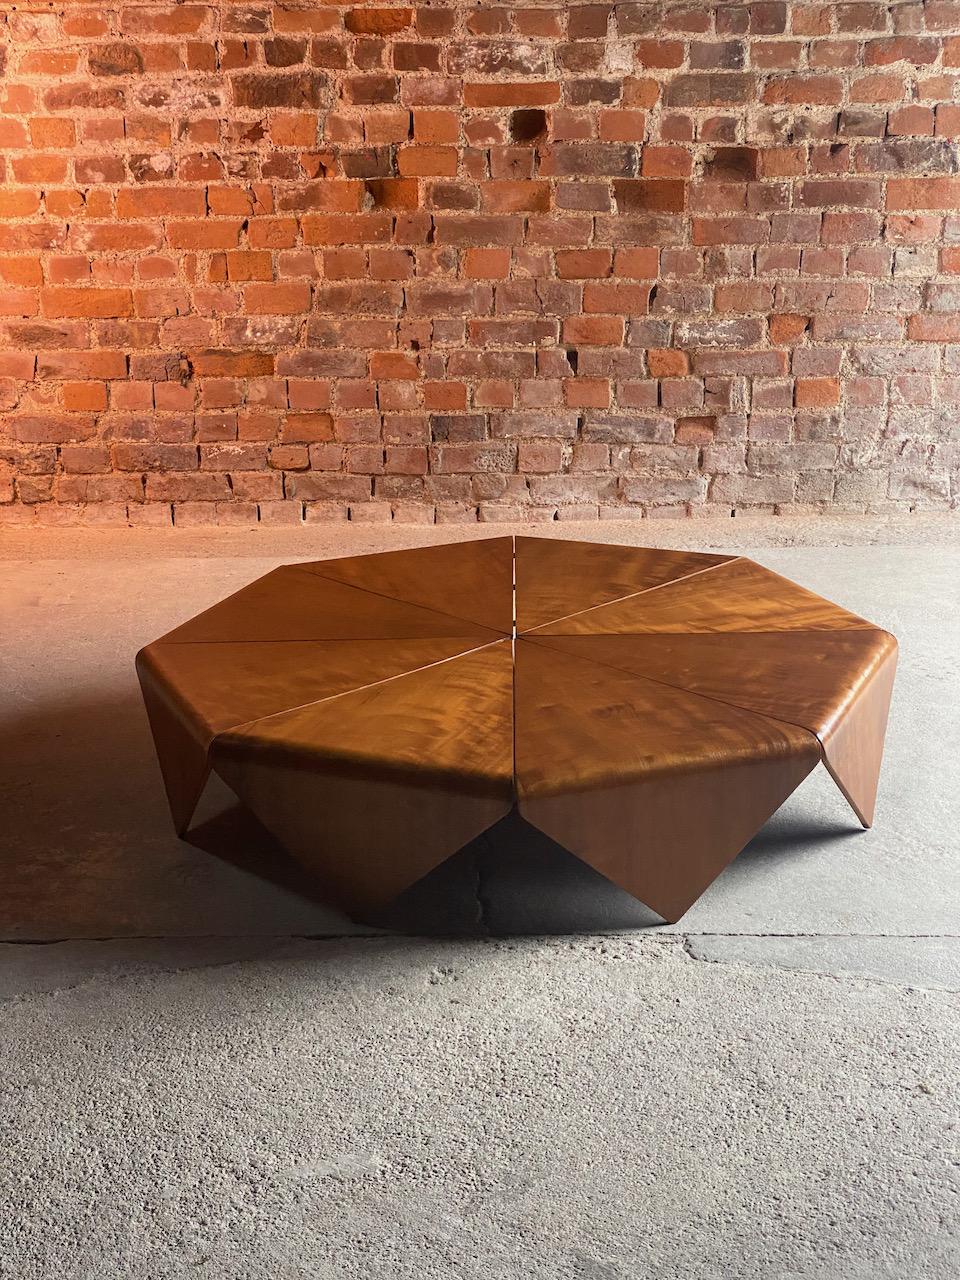 Jorge Zalszupin Petalas Imbuia coffee table by L' Atelier, circa 1960

Stunning Jorge Zalszupin ‘Petalas' Brazilian Walnut Imbuia coffee table manufactured by L' Atelier circa 1960, the octagonal Petalas coffee table was inspired by the folded